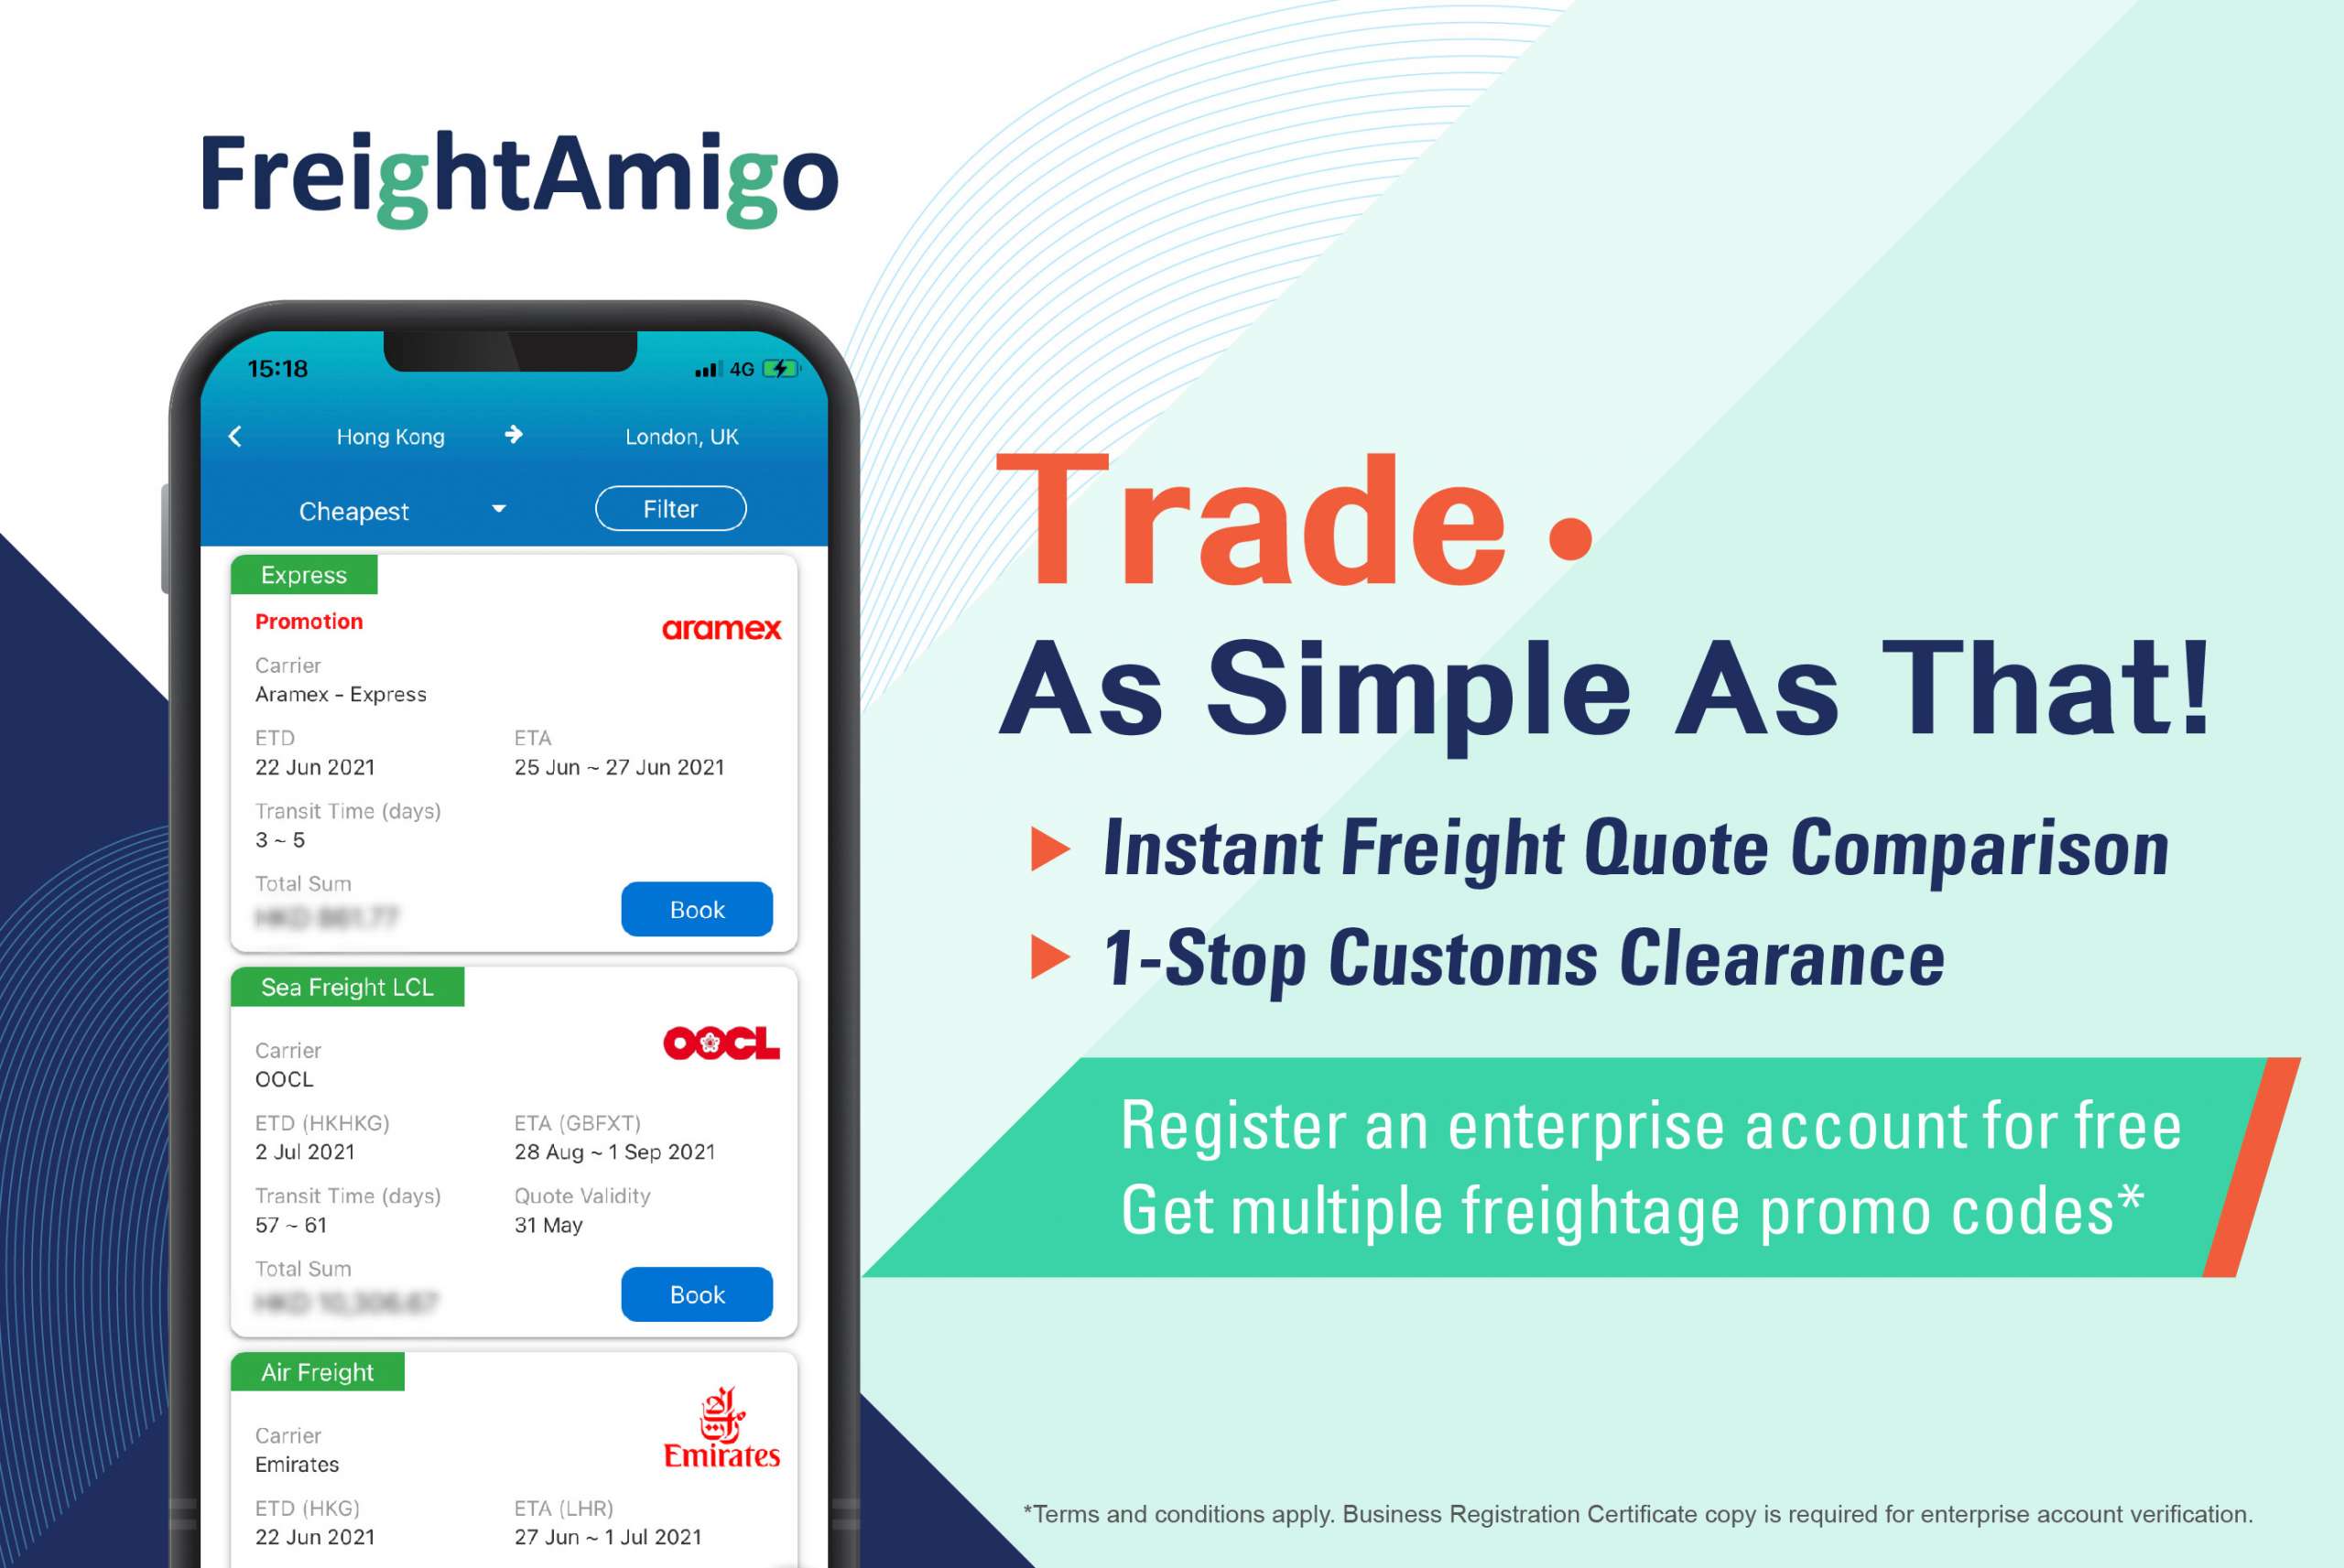 Trade ‧ As Simple As That – Enterprise Client Enjoys Multiple Freightage Promo Codes